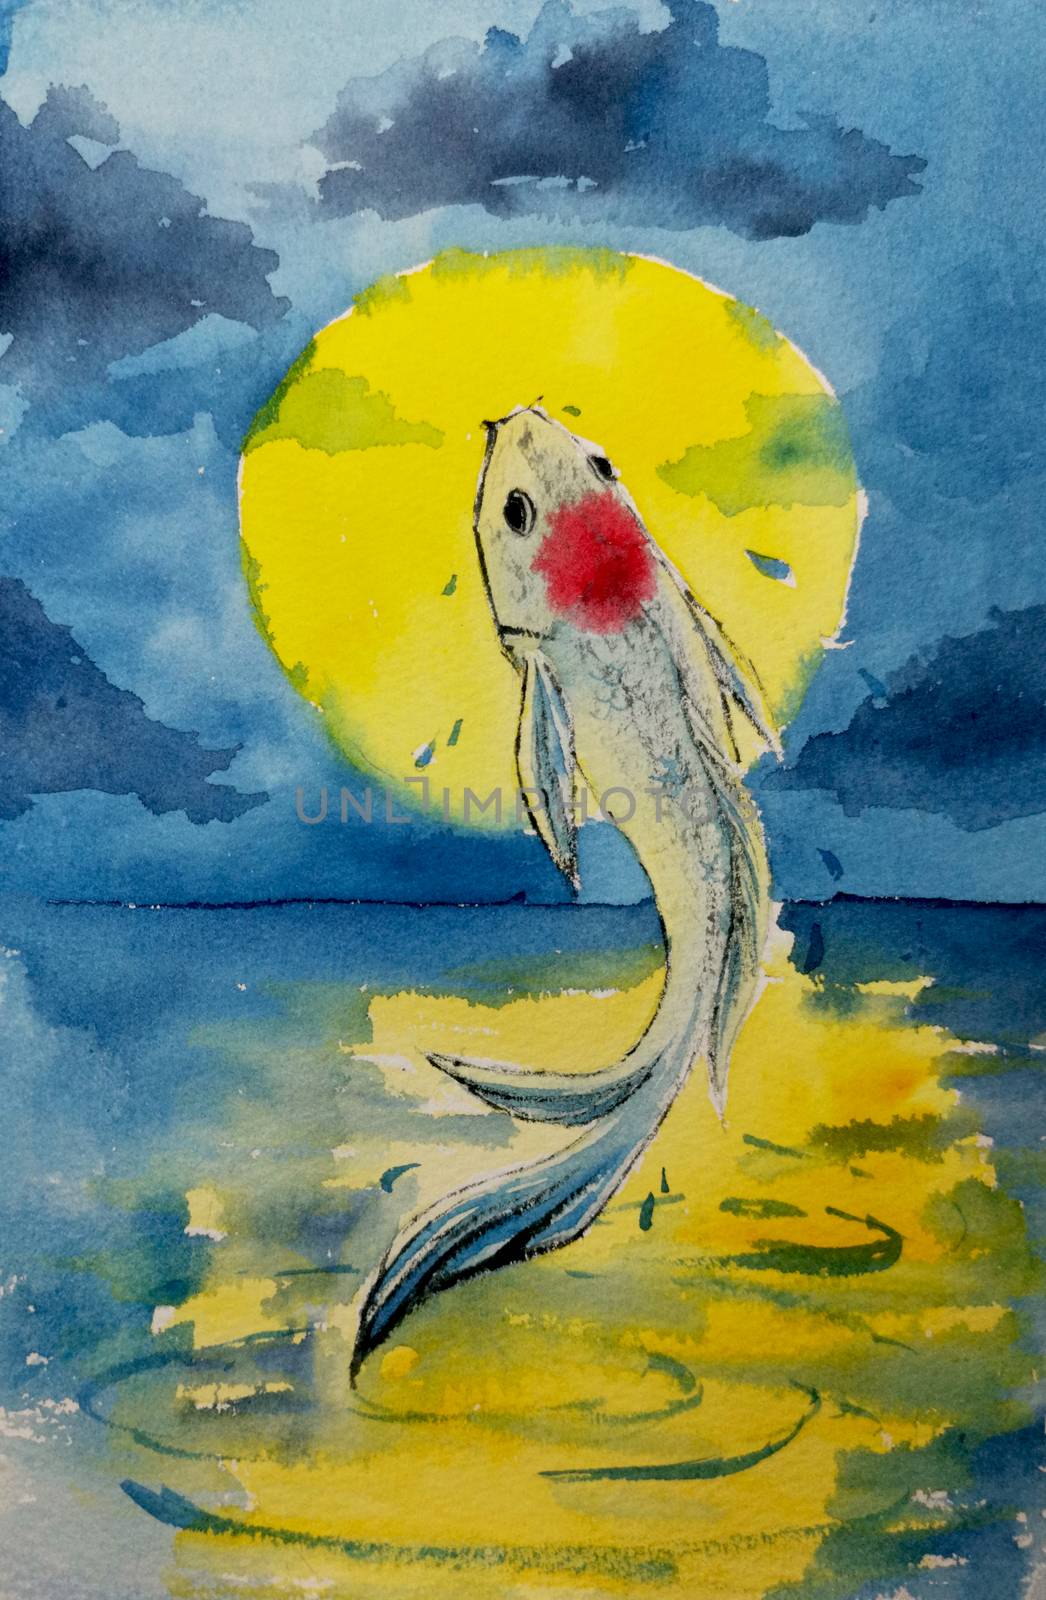 a koi fish jumped to the surface in fullmoon night. Watercolor hand painting. symbol of good luck and prosperity.